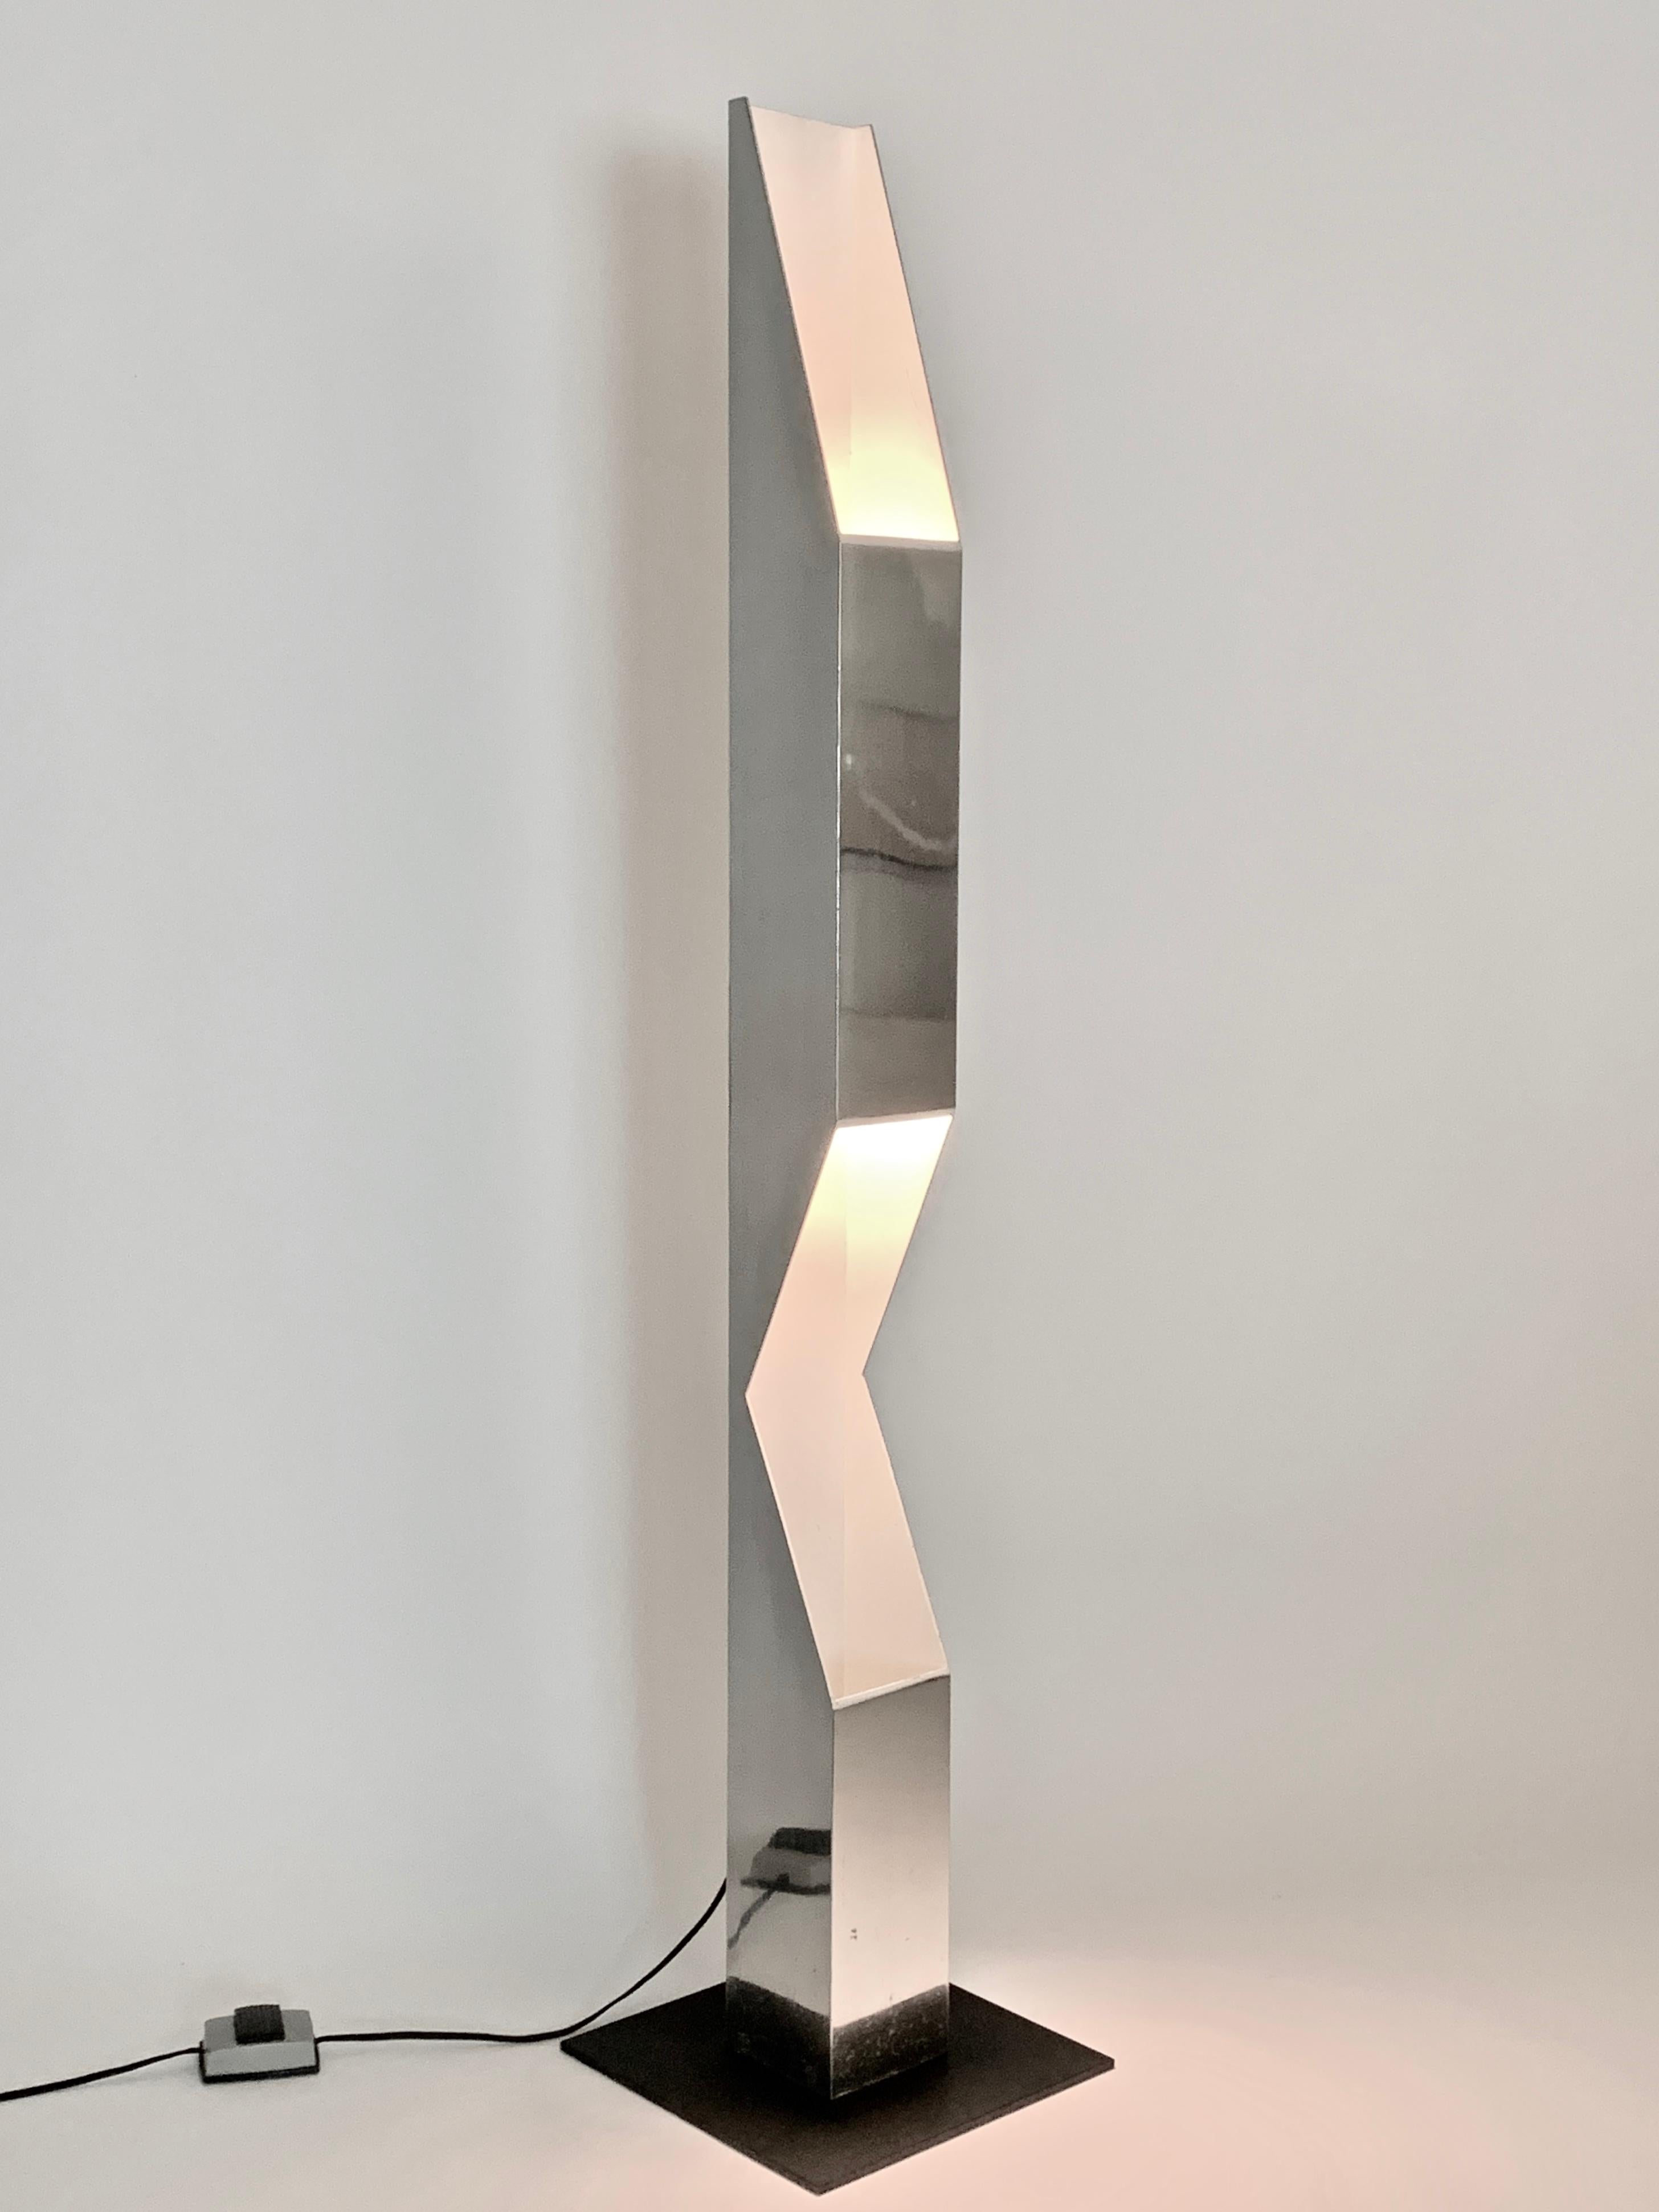 Neal Small for Koch & Lowy Aluminum and Steel Skyscraper Floor Lamp, 1970s For Sale 2